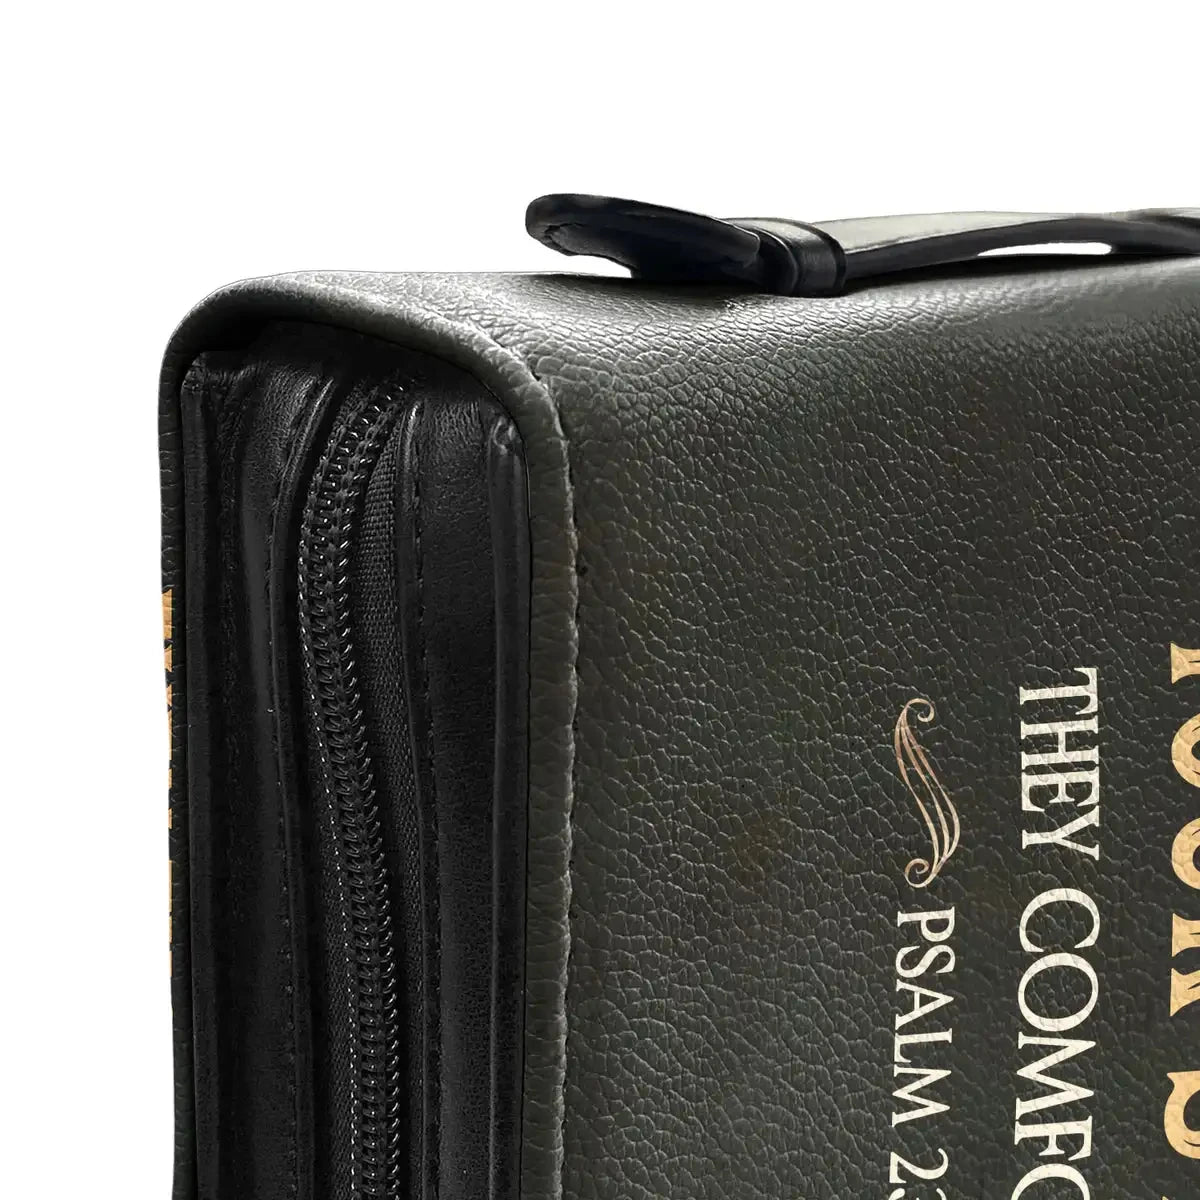 Personalized New PU Leather Bible Bag I Will Fear No Evil for You Are with Me Words Lion Design Women Handbags Study Book Holy Storage Box